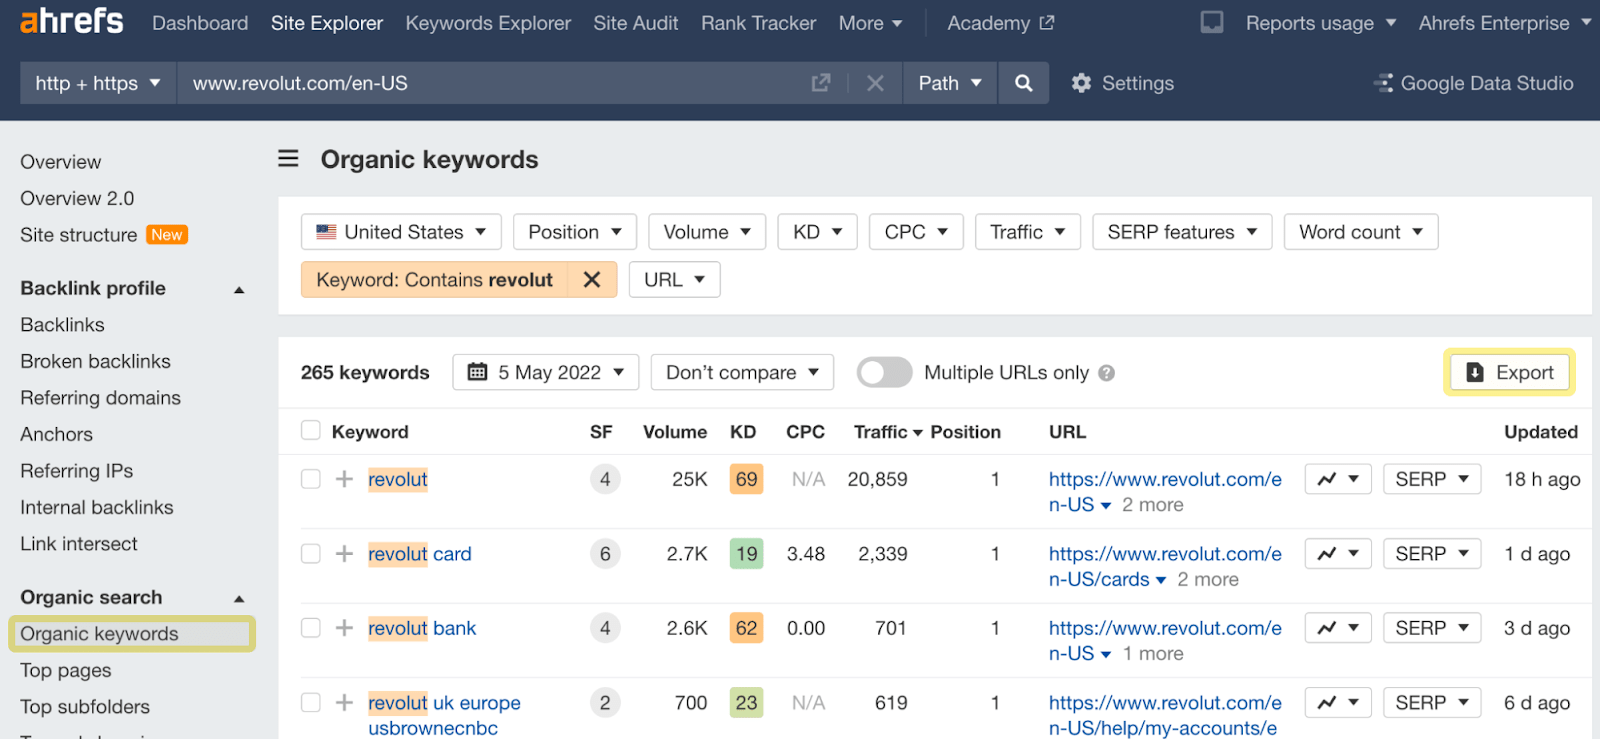 Organic keywords report results (with filters applied) for Revolut's site 